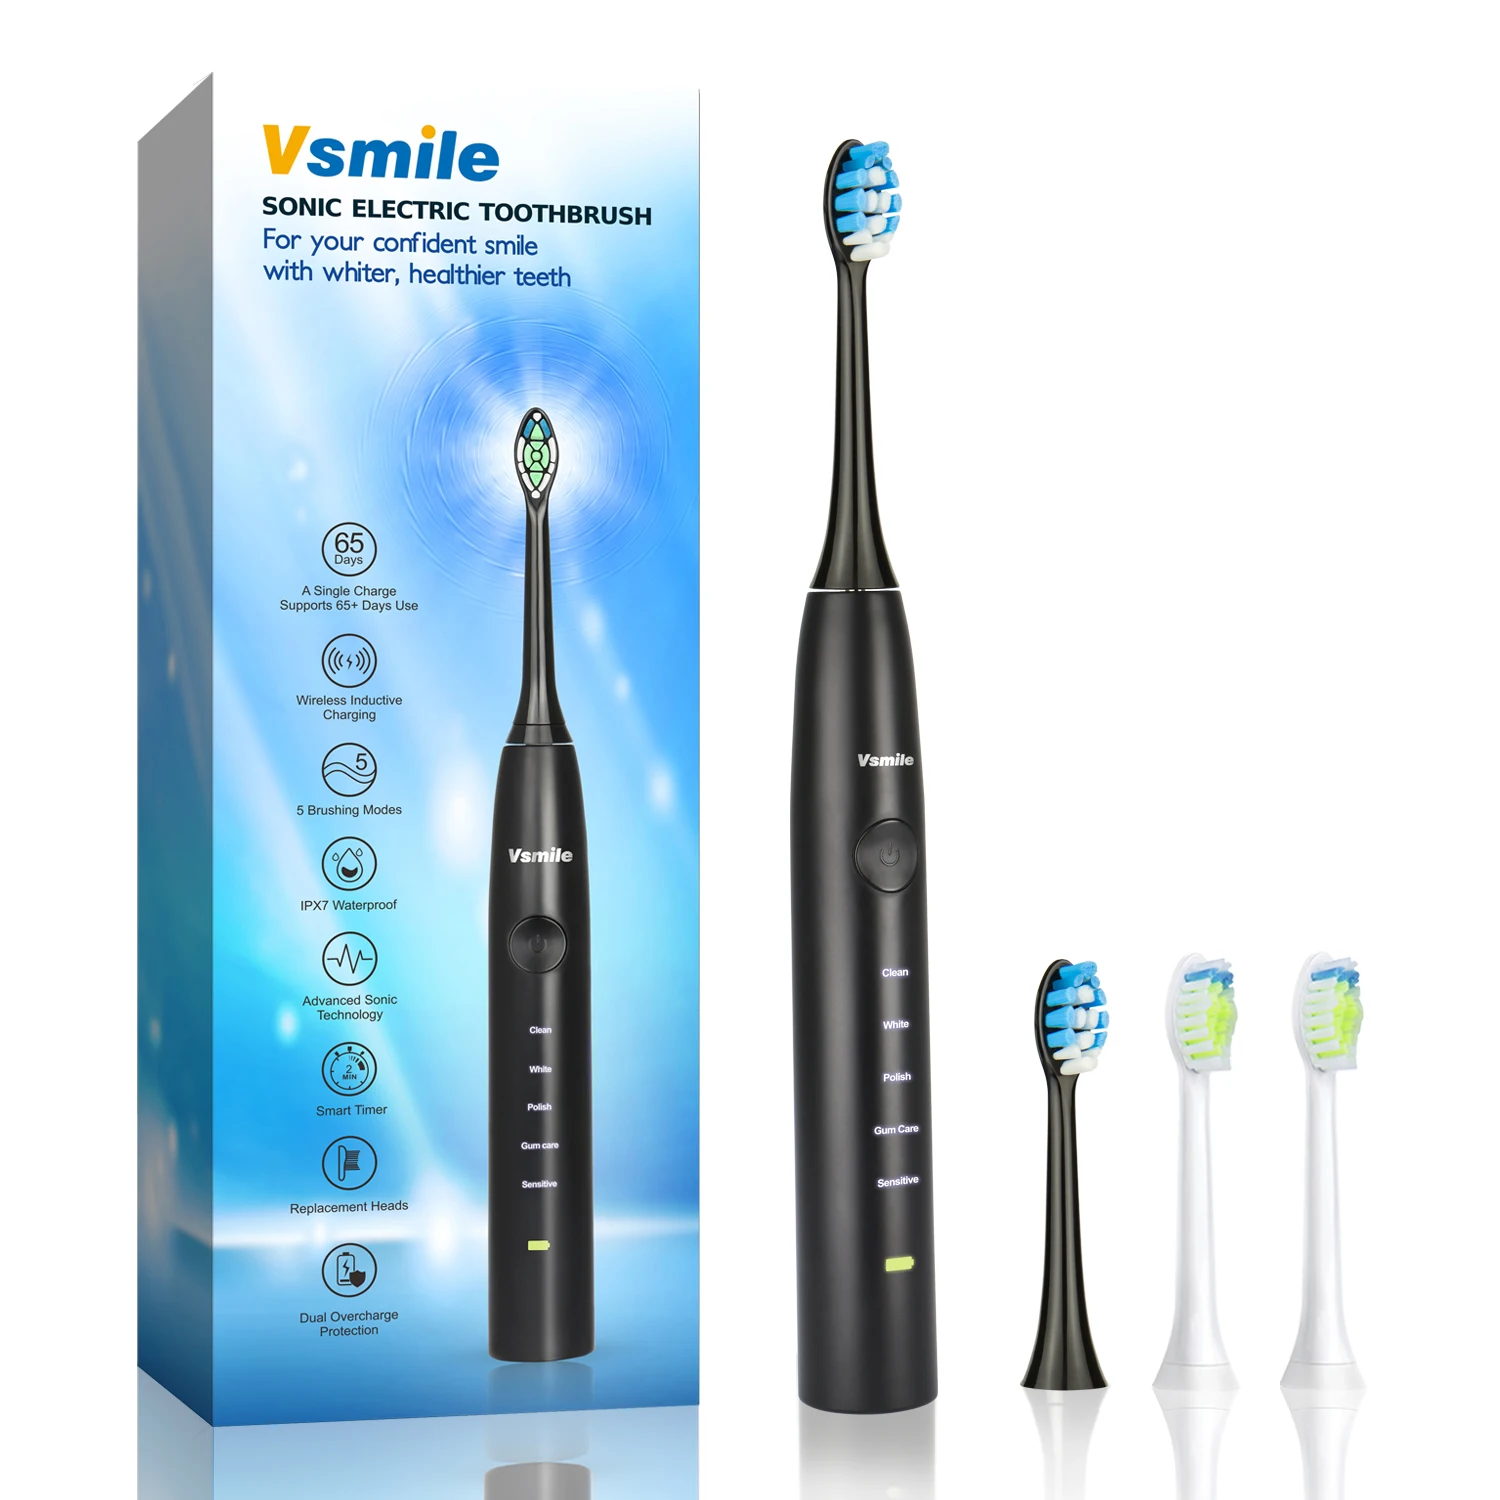 

Vsmile Sonic Electric Toothbrush 2200mAh Battery 80 Days on One Charge 5 Modes 4 Brush Heads Travel Whitening Smart Toothbrush